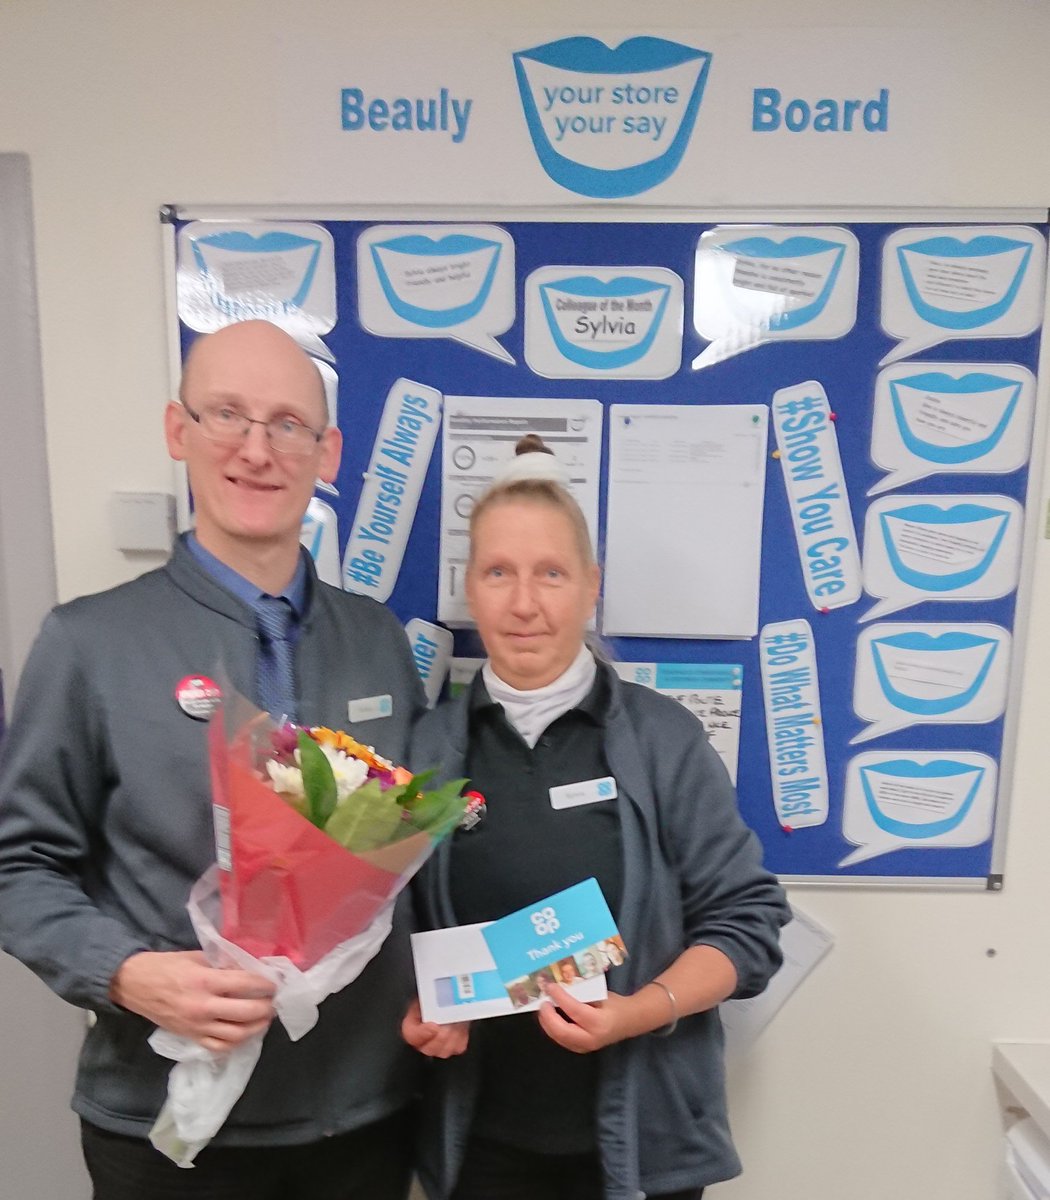 Delighted to give some recognition to our Sylvia Ipsen our #YSYS colleague of the month. So humble 'But its just normal for me!' #amazingcustomerservice #beingcoop #Beyourselfalways @coopNO0102 @muirdenc @coopno01 @furnivalderek @YsysDanny